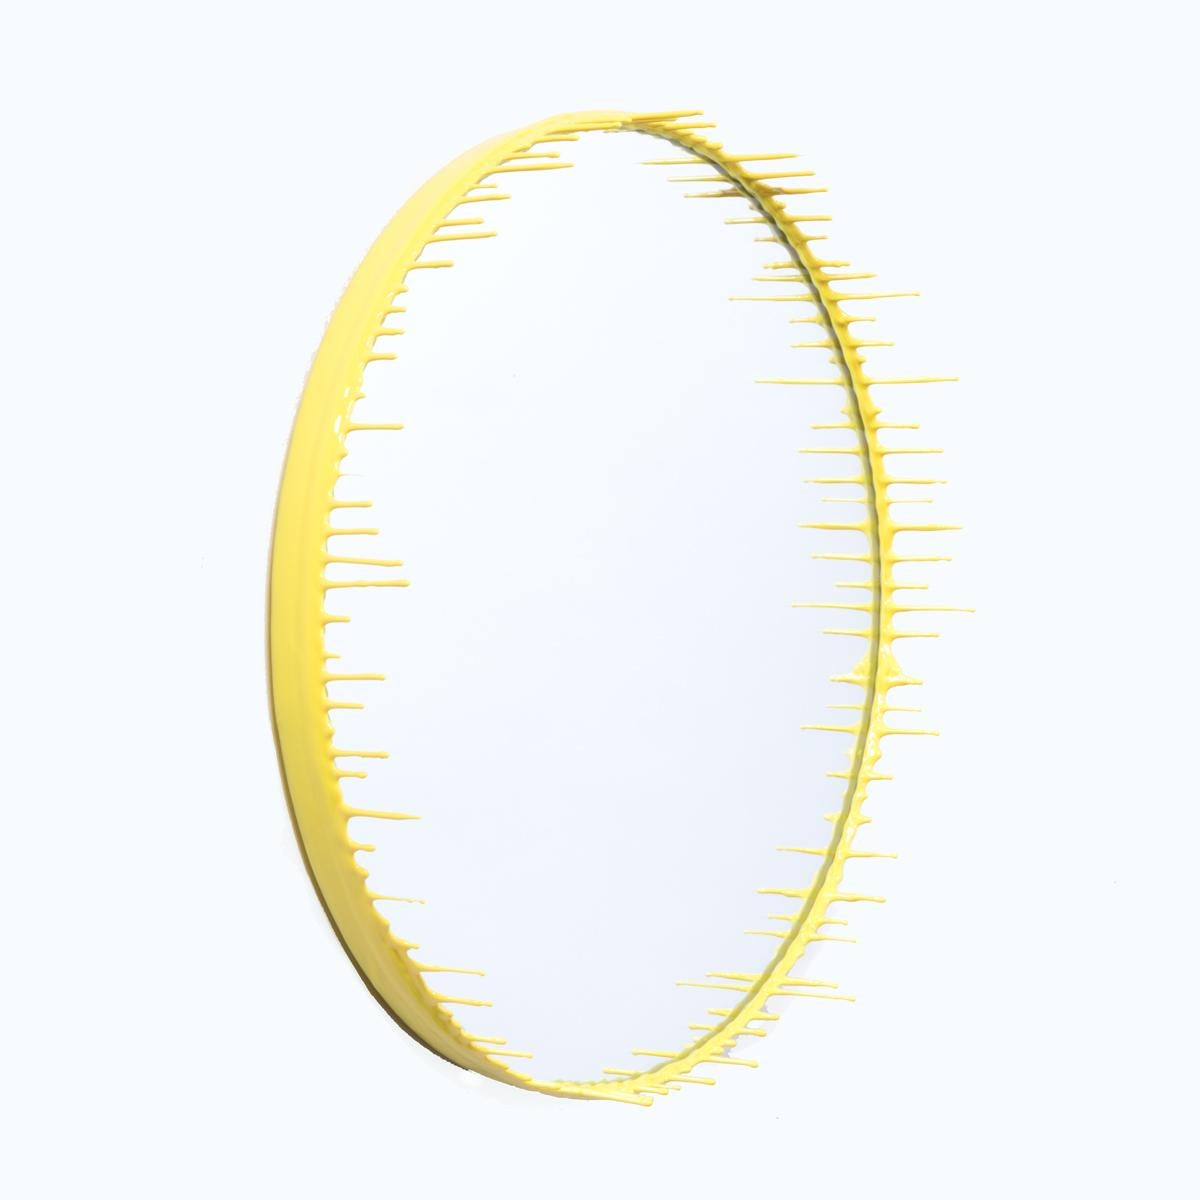 Drip Mirror, Primary collection, yellow by Elyse Graham, USA, 2015

Drip mirror, Primary collection, yellow
Elyse Graham, USA, 2015
Hand-pigmented and hand-poured resin, glass mirror
Available in four sizes:
18 in, 26 in, 30 in, 36 in